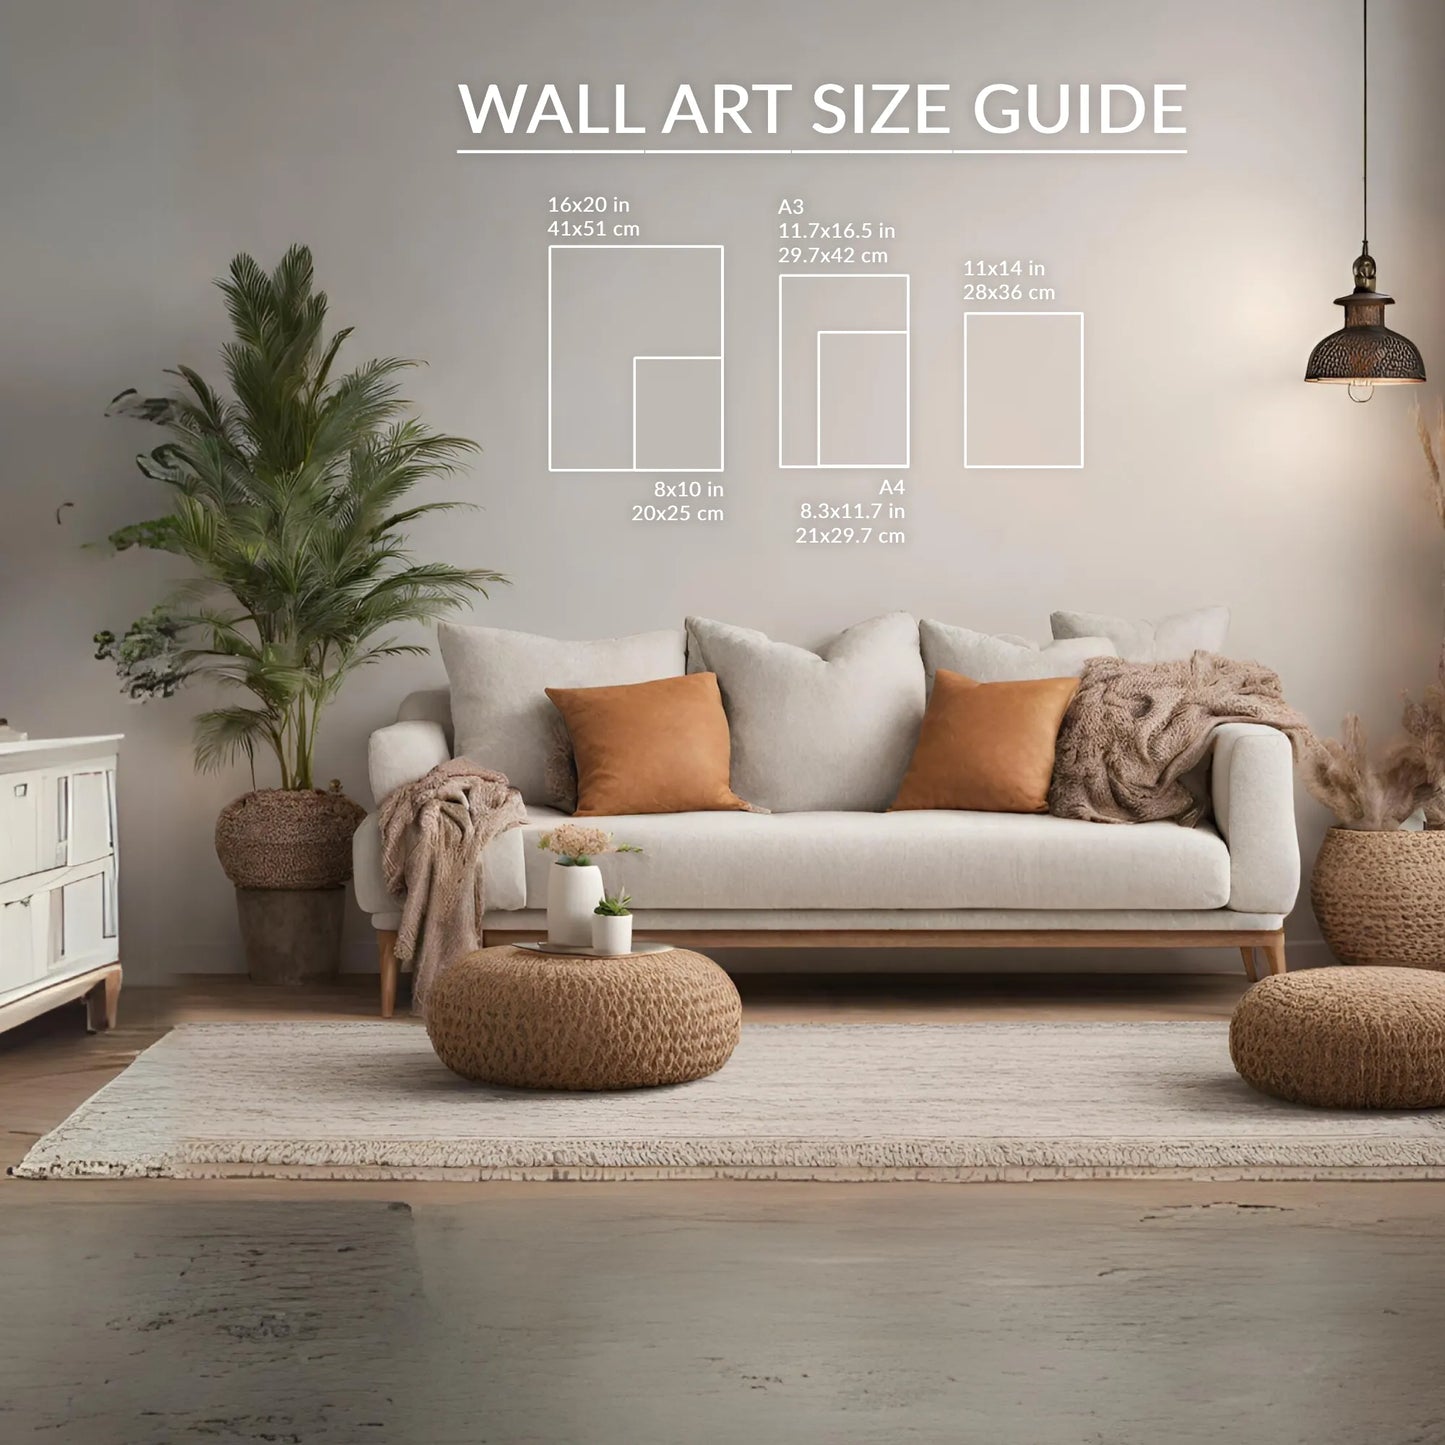 Editable Picture Collage Template Wall Art Size Guide